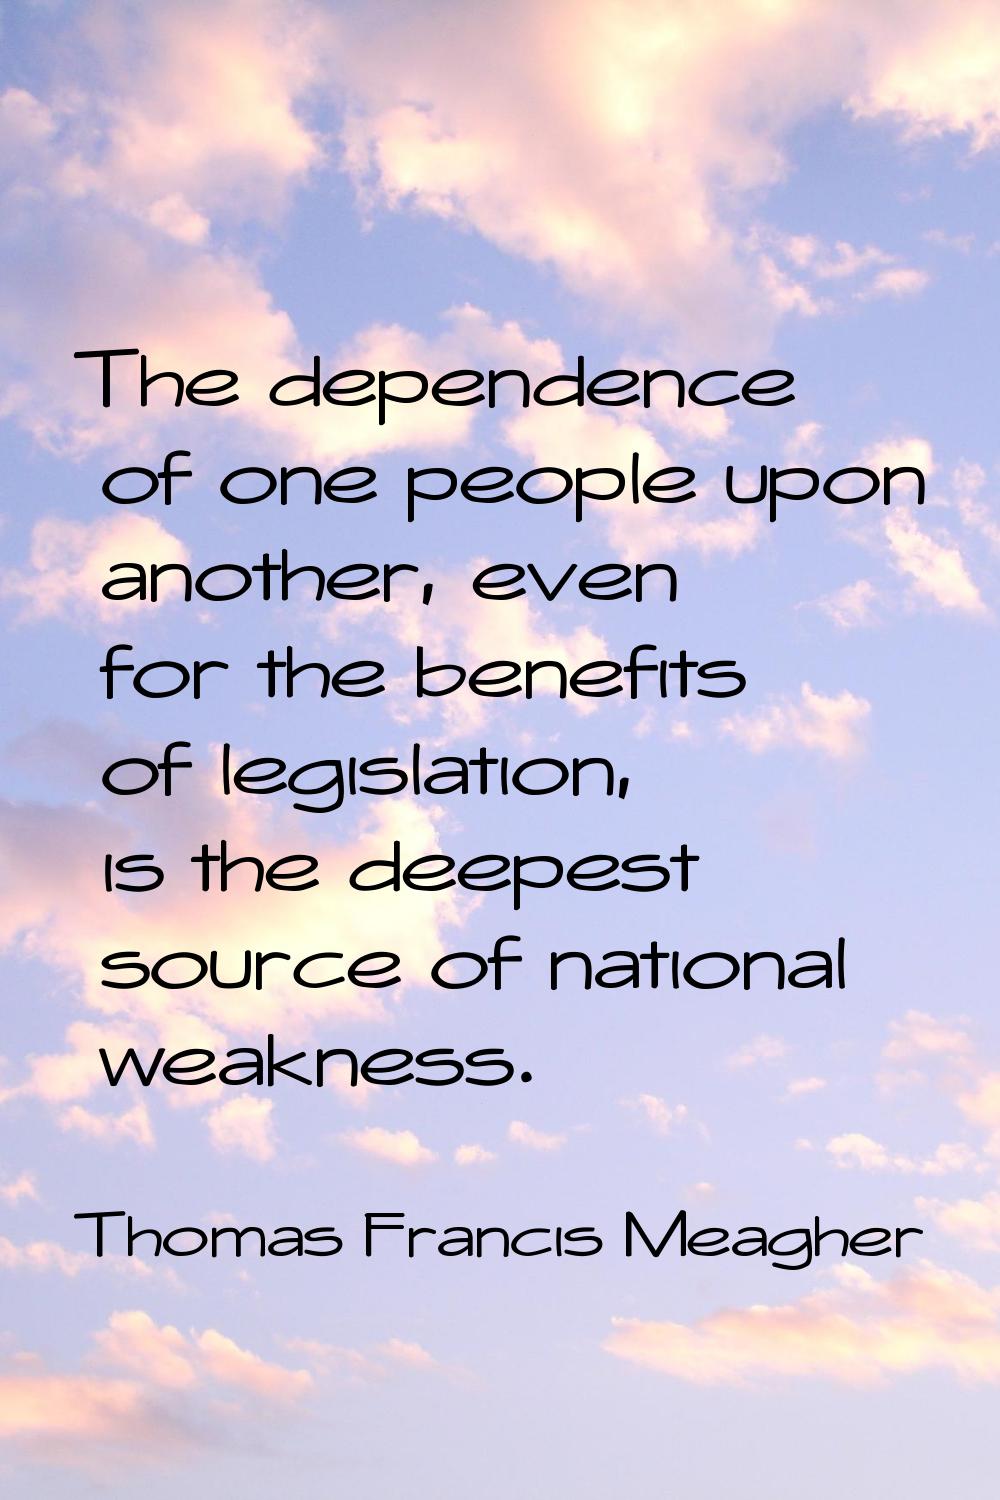 The dependence of one people upon another, even for the benefits of legislation, is the deepest sou